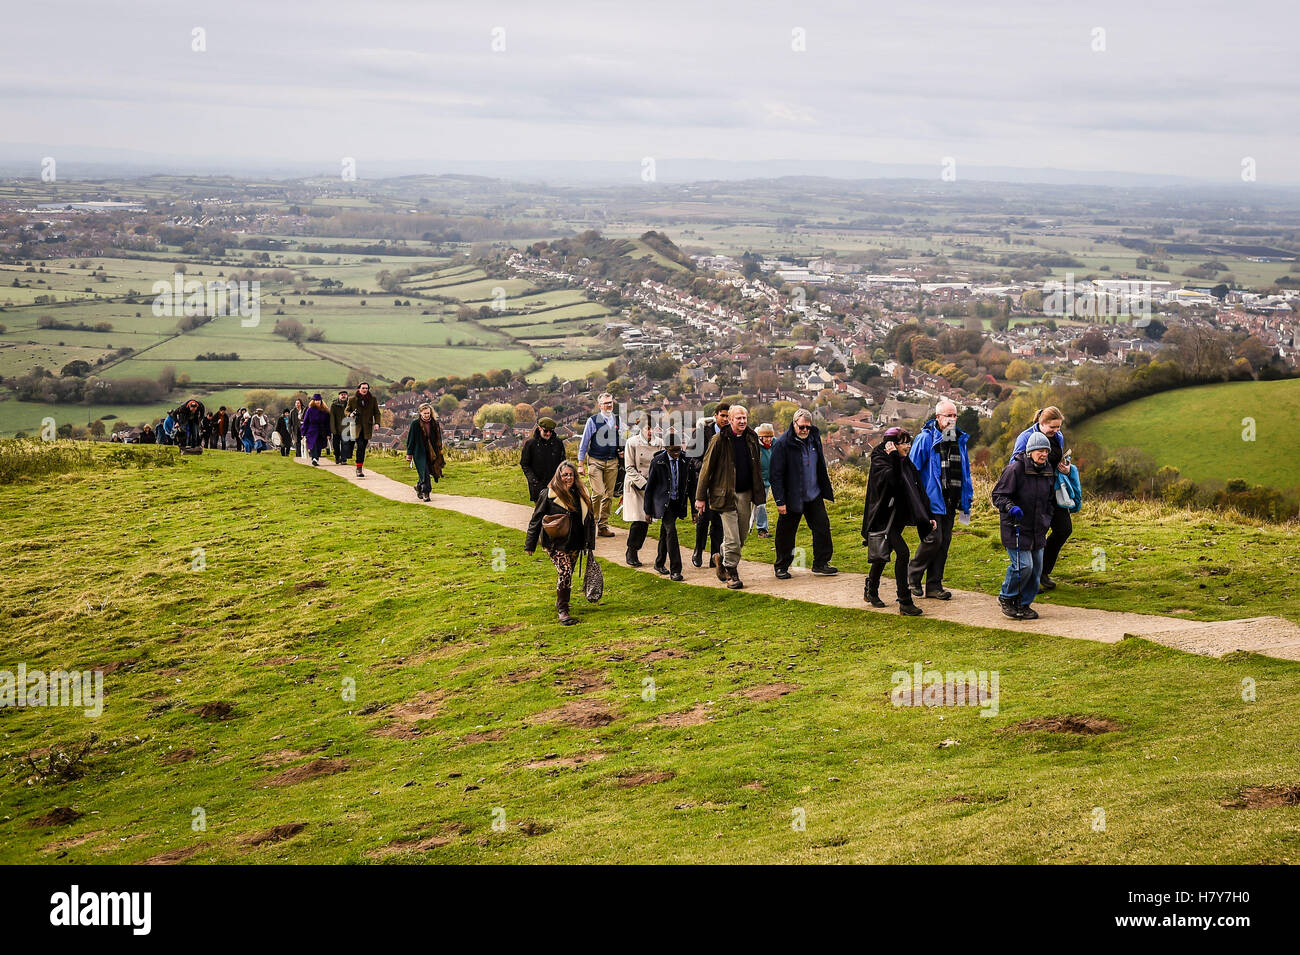 The Archbishop of Canterbury, the Most Rev Justin Welby ascends the 301 steps to the top of Glastonbury Tor accompanied by local clergy, parishoners and people of other faith and spiritual groups during his visit to the Somerset area. Stock Photo